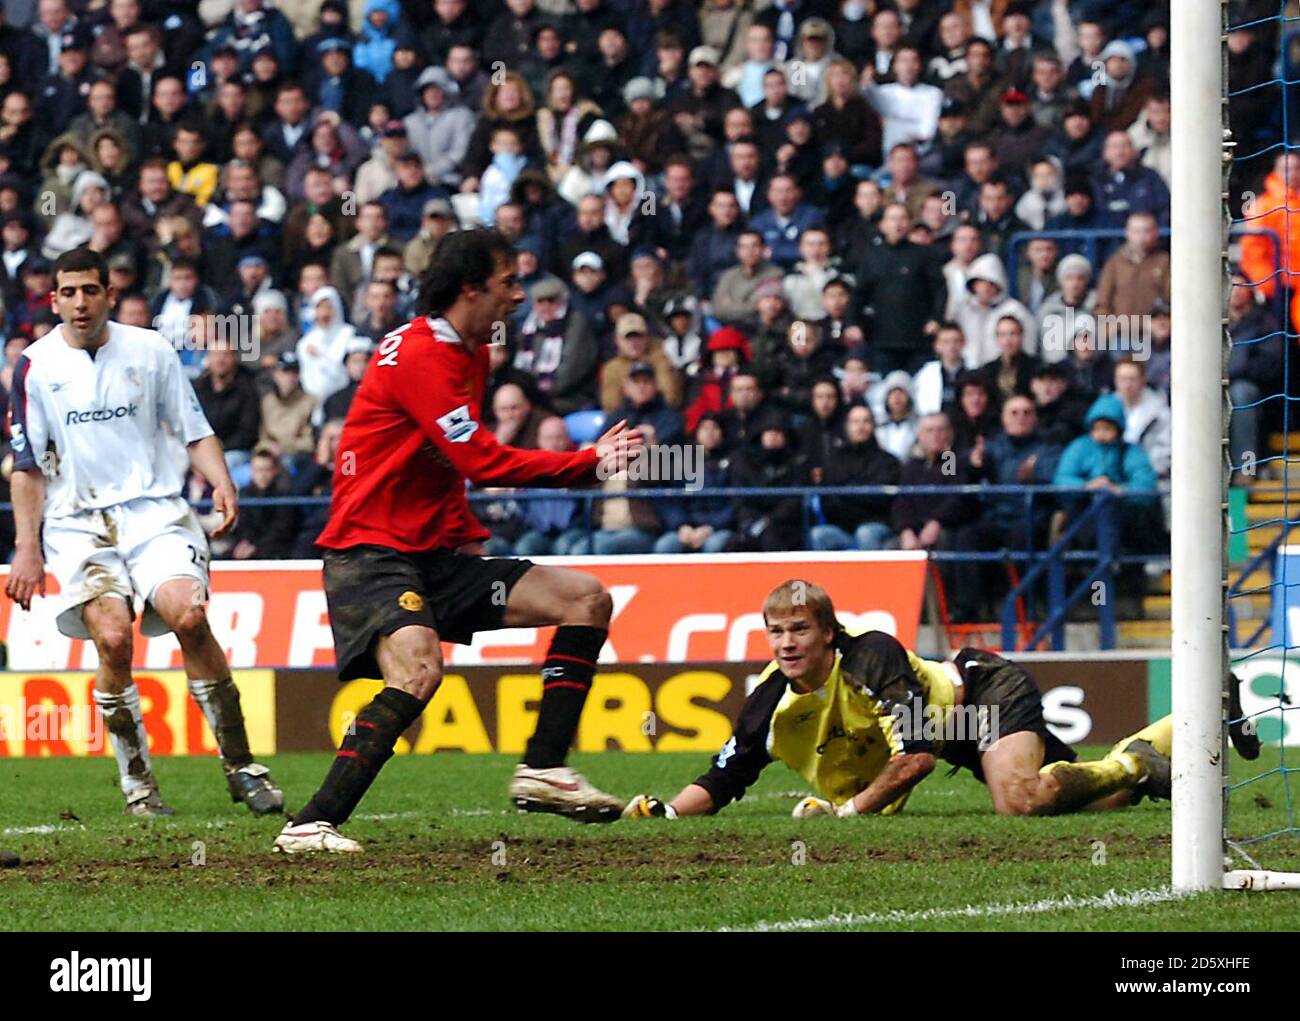 Bolton Wanderers' goalkeeper Jussi Jaaskelainen looks dejected as Manchester United's Ruud van Nistelrooy scores the winning goal Stock Photo